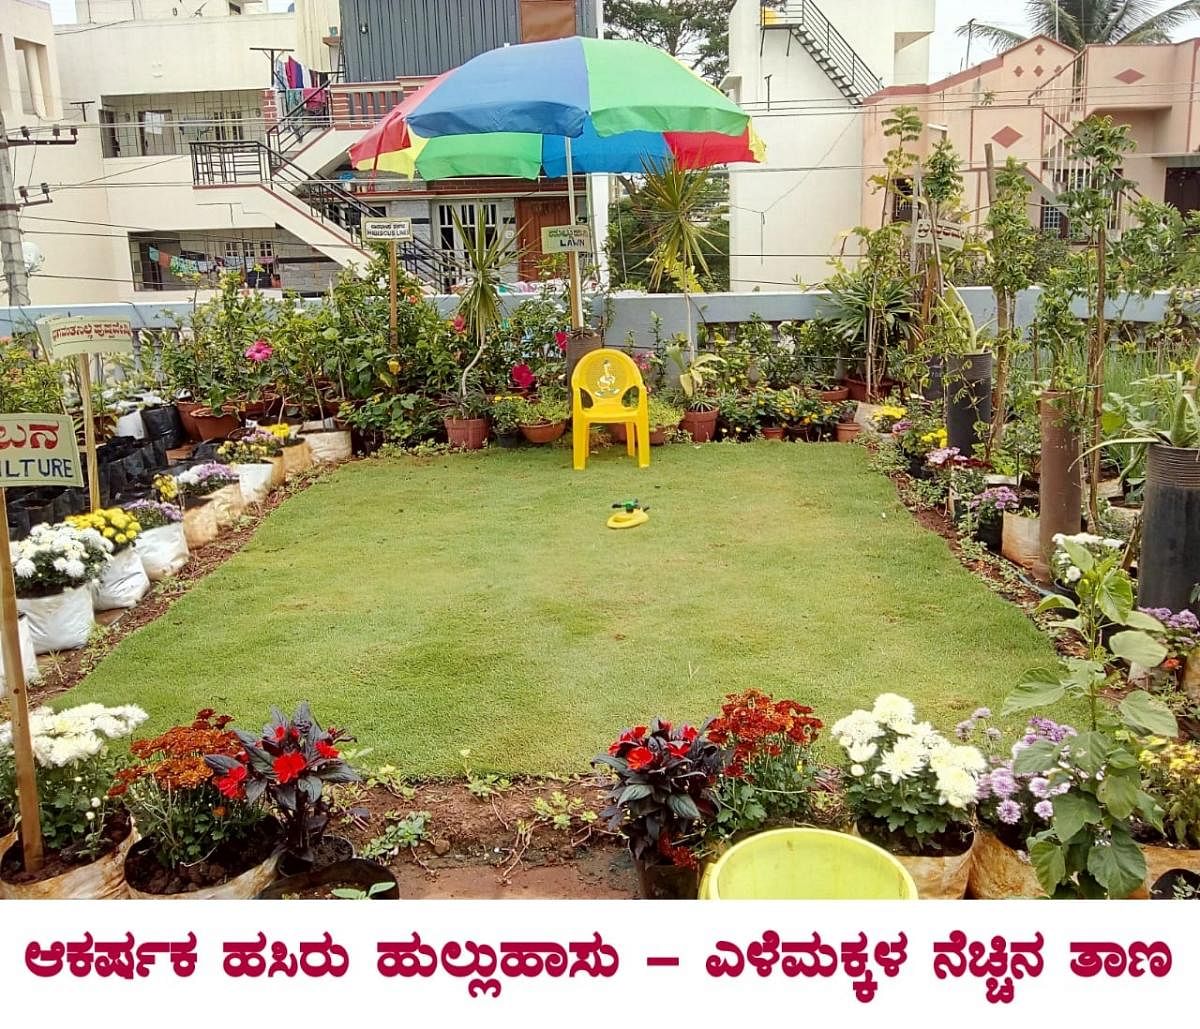 Organic way: Views of the terrace garden developed by agriculture scientist Rudraradhya (centre) in Mysuru; (below) Rudraradhya’s son harvesting tomatoes. photos by author